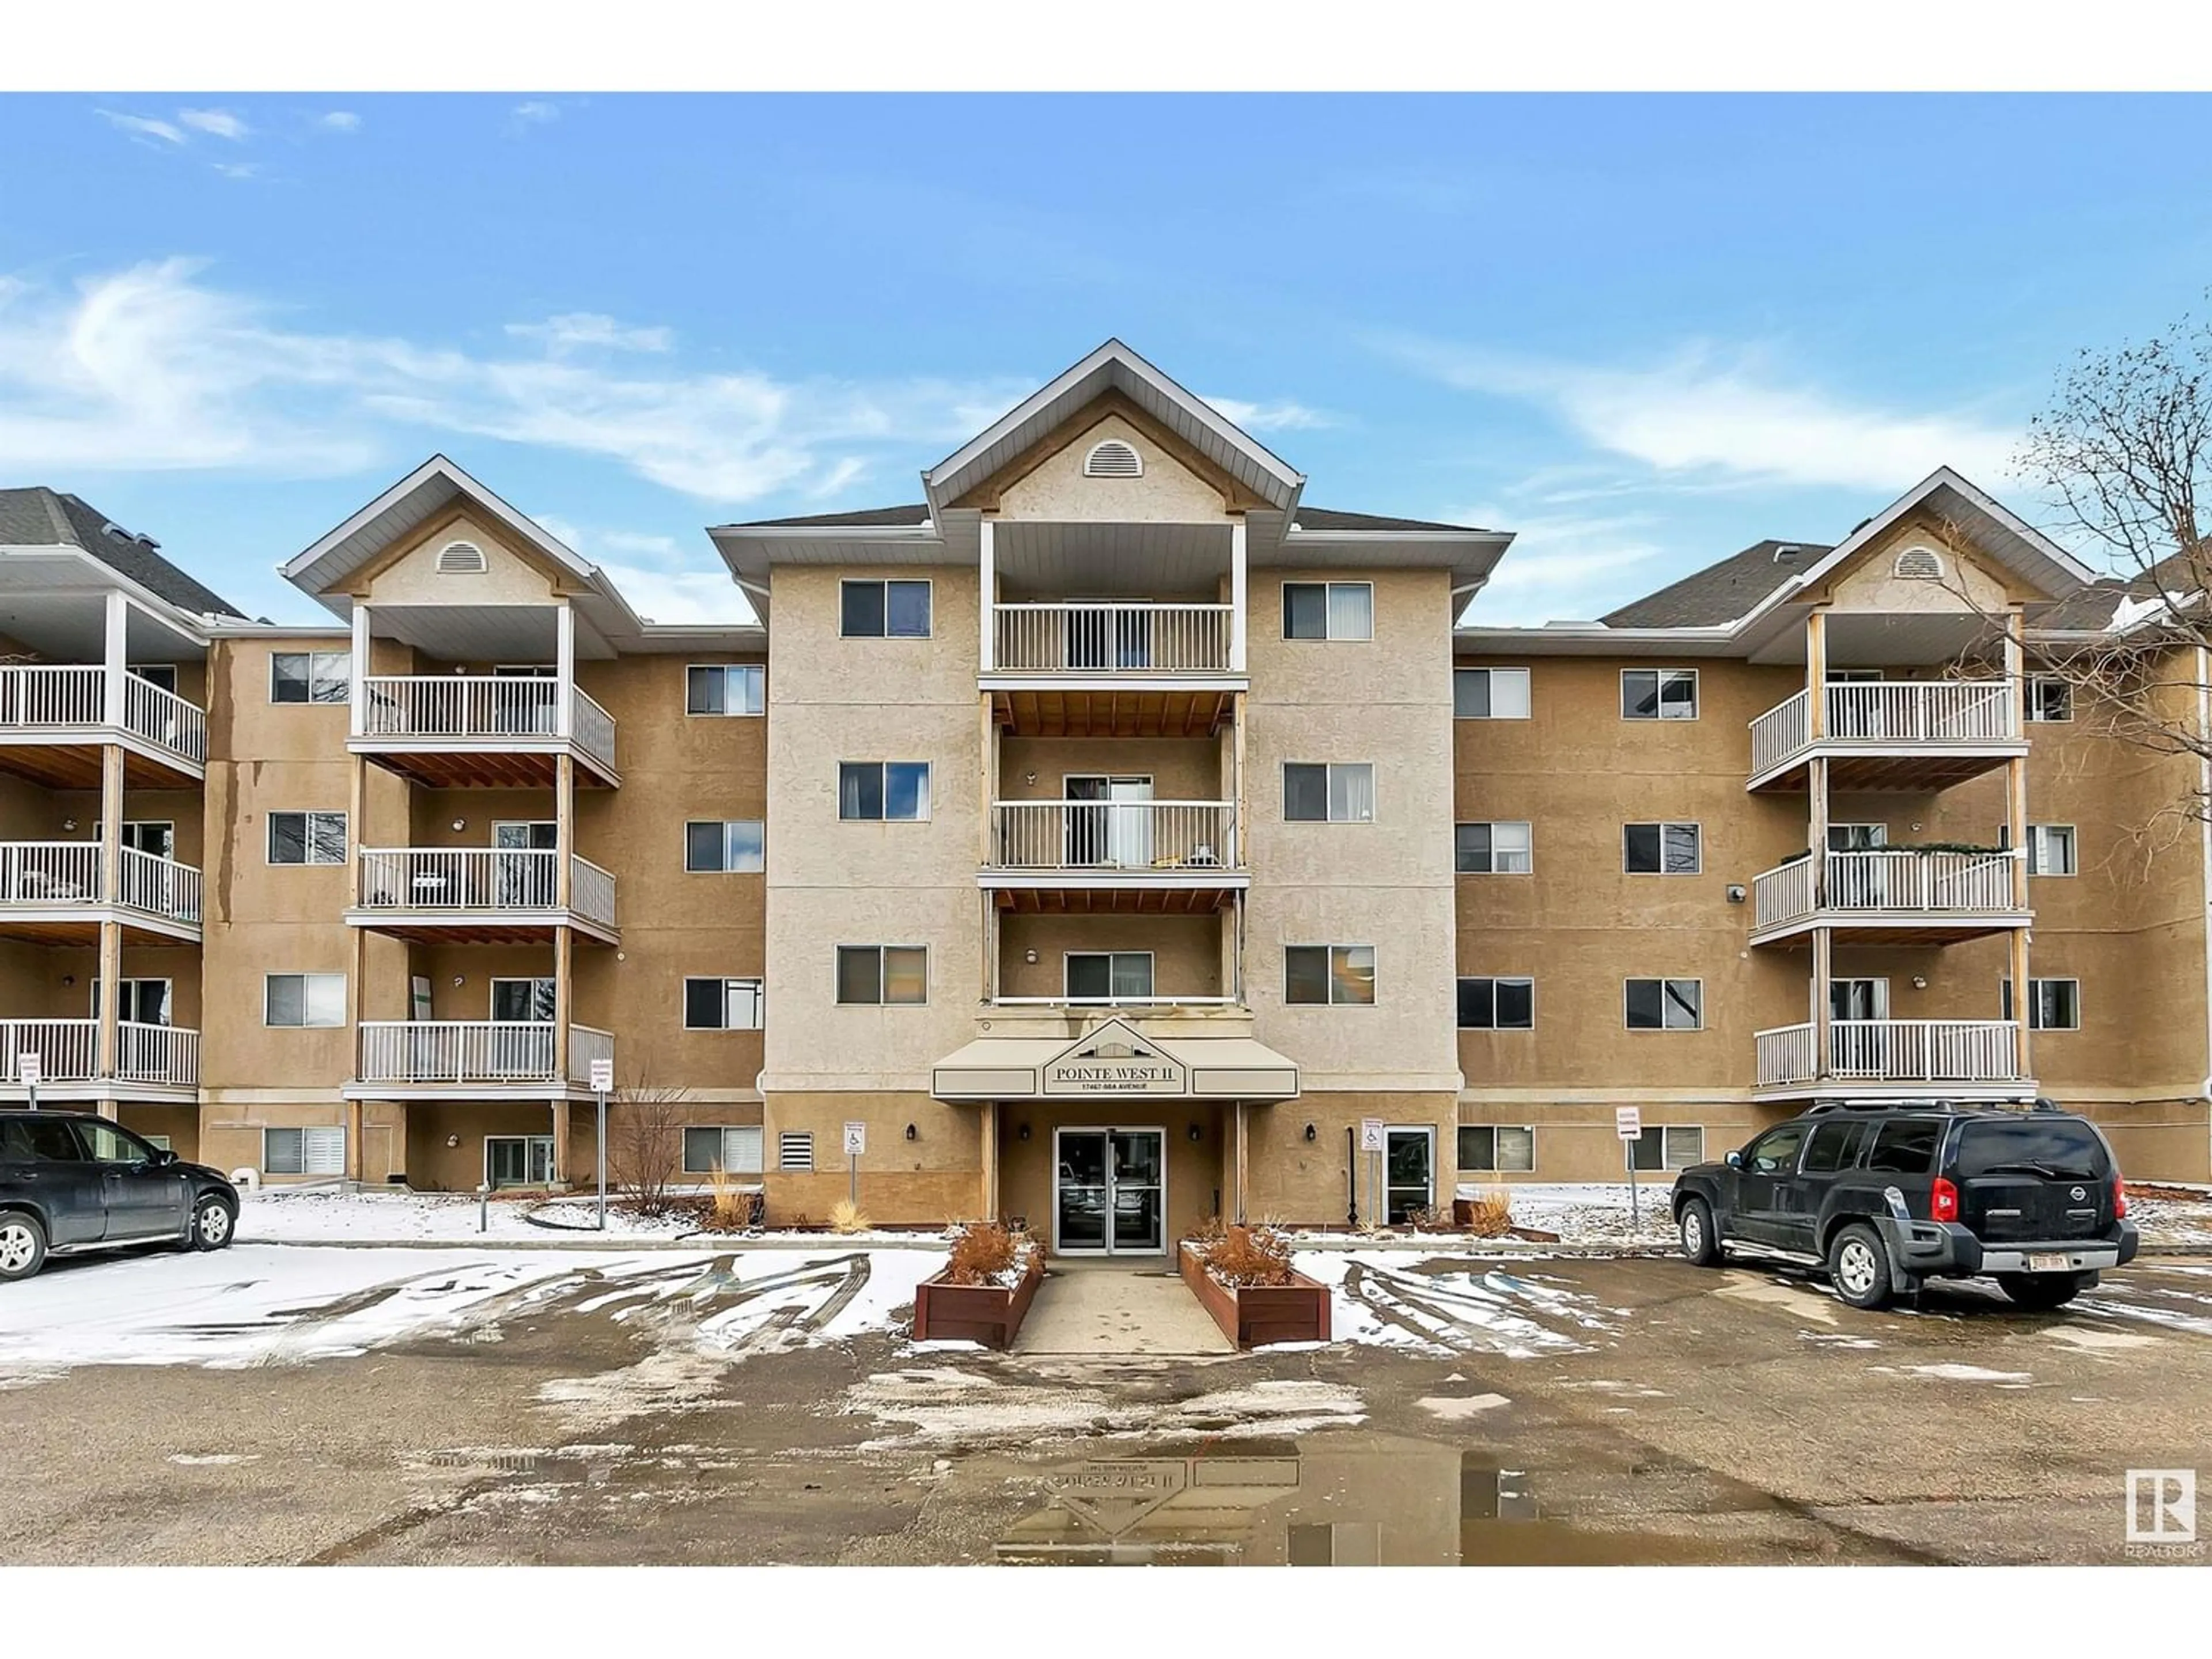 A pic from exterior of the house or condo for #111 17467 98A AV NW NW, Edmonton Alberta T5T2E9